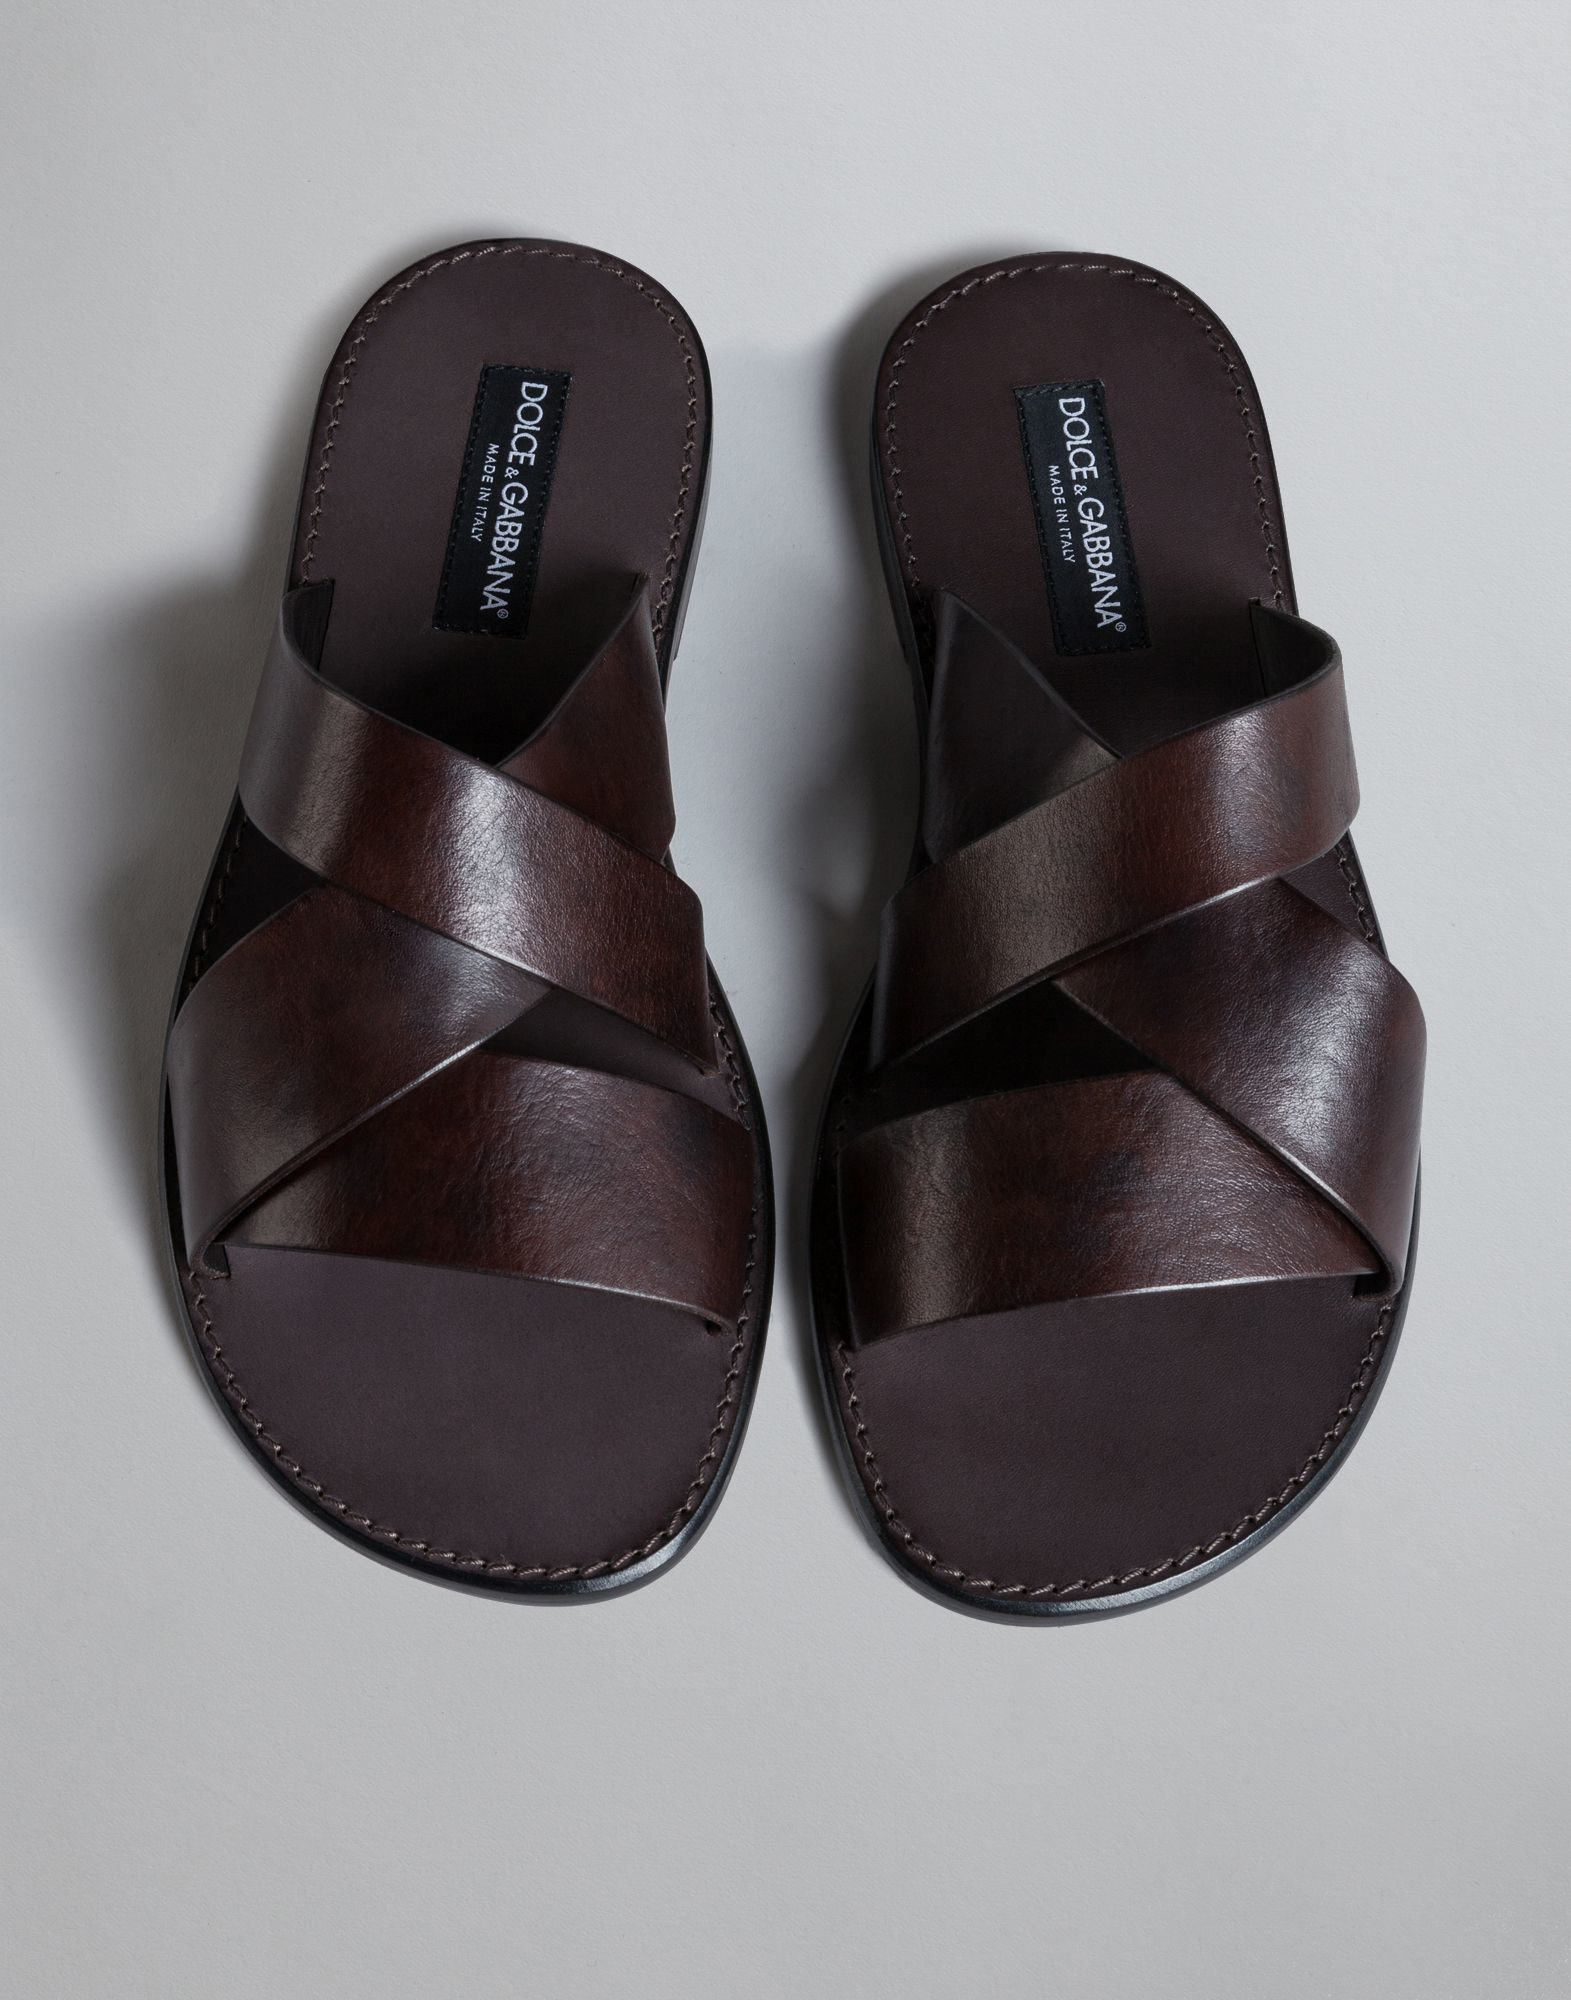 Dolce & Gabbana Leather Sandal in Brown for Men - Lyst